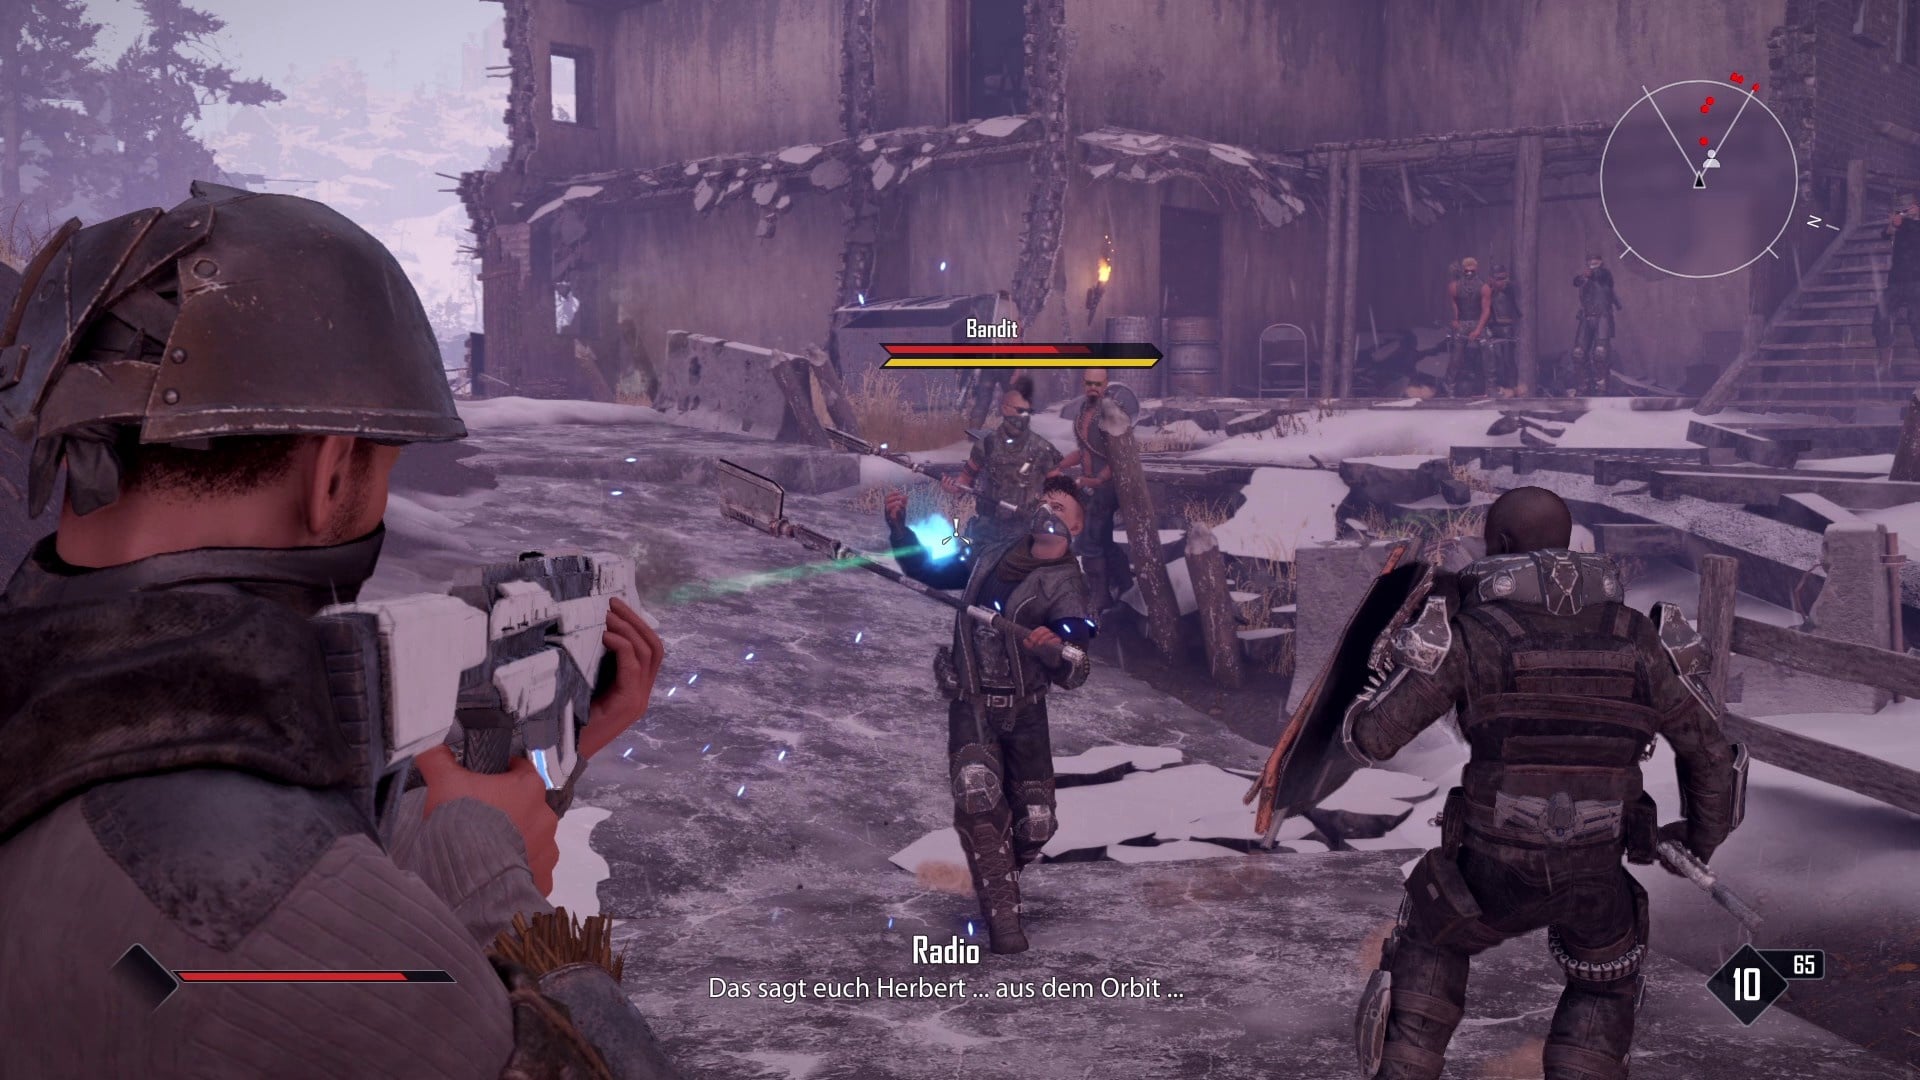 The unique mix of medieval and sci-fi setting also allows laser weapons and axes to coexist on an equal footing in Elex 2.